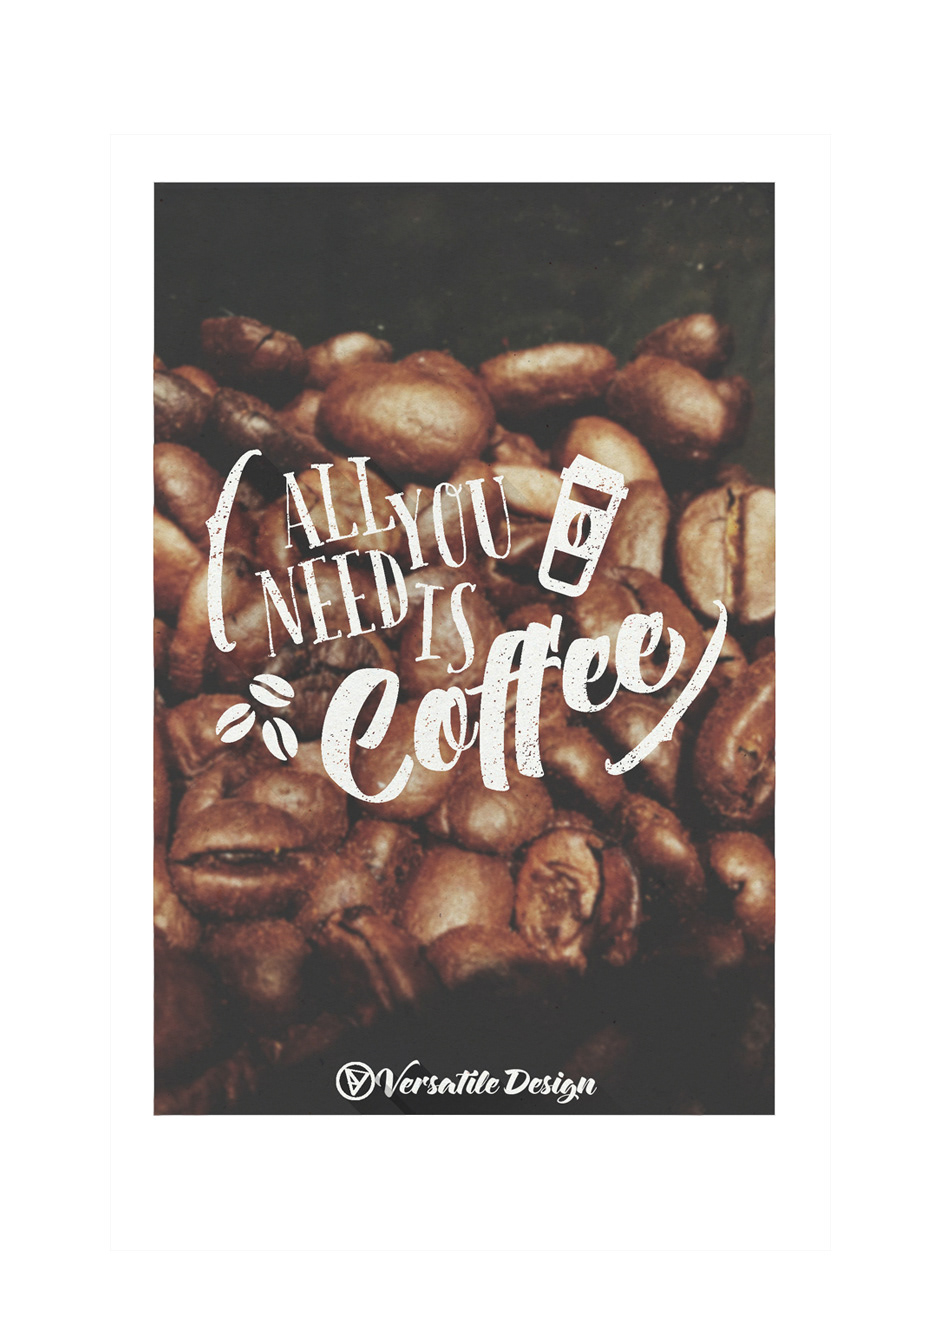 type poster vintage Retro Love quote Coffee Need cafe tipo tipografia letra letter brush pencil